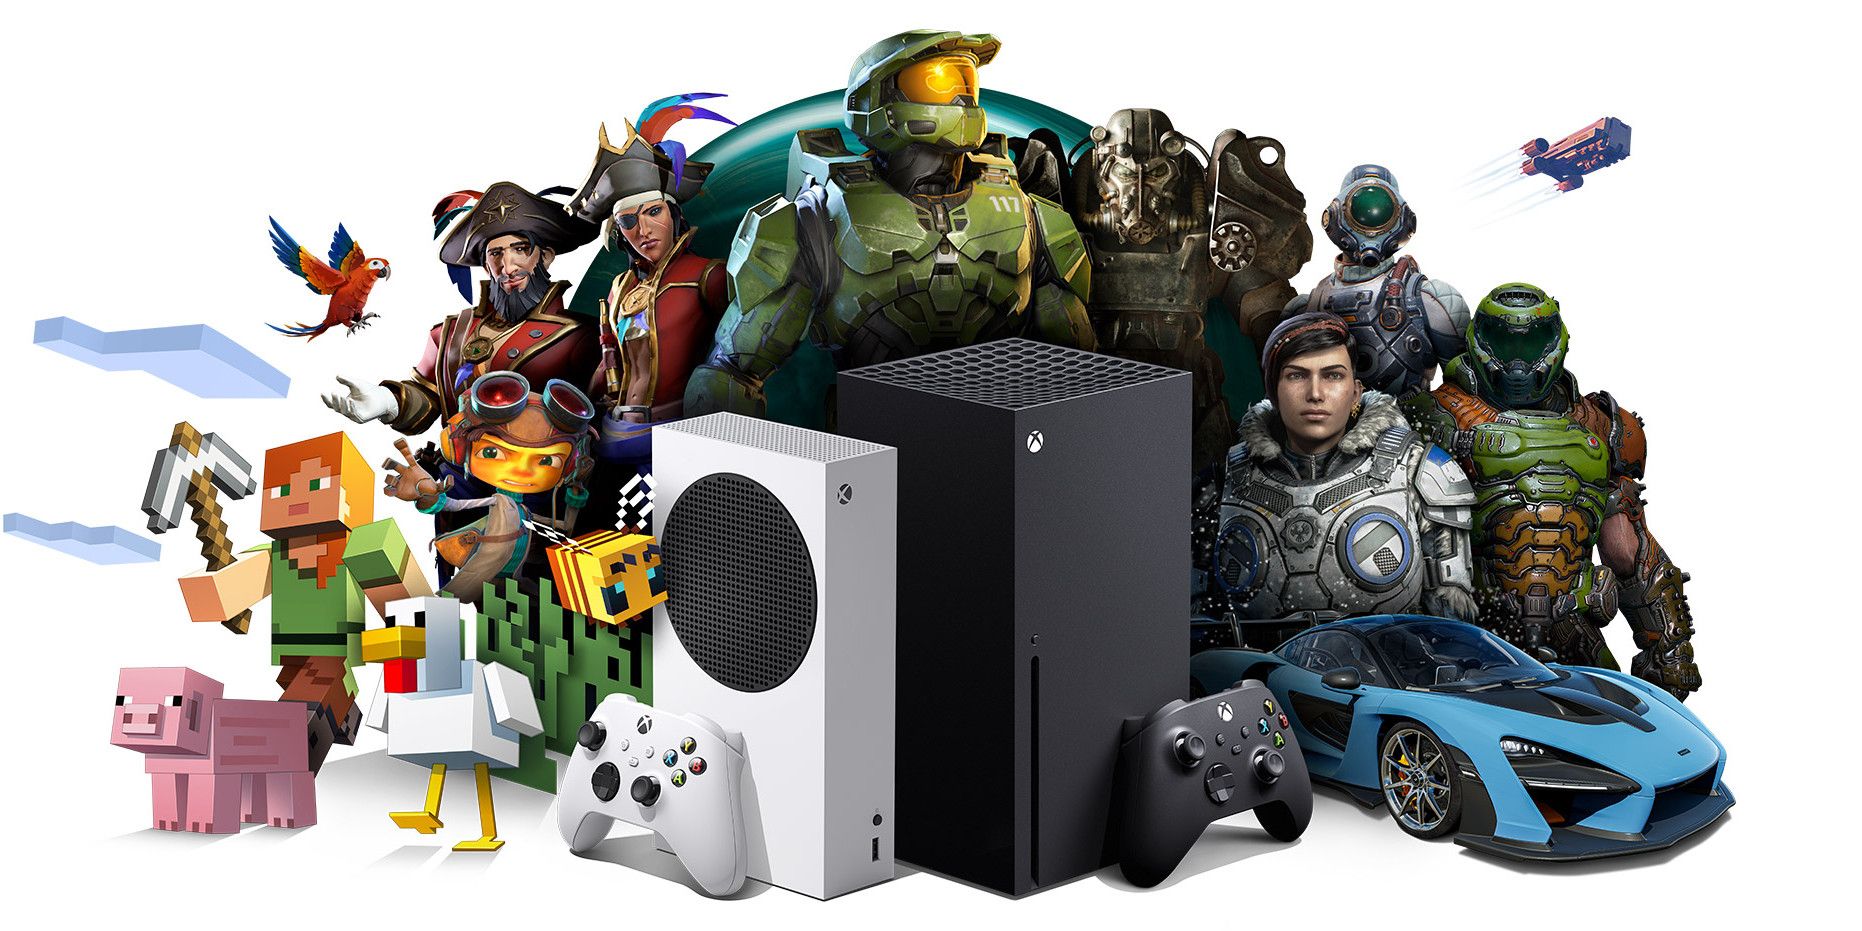 Xbox Games Lineup with Series X and S consoles